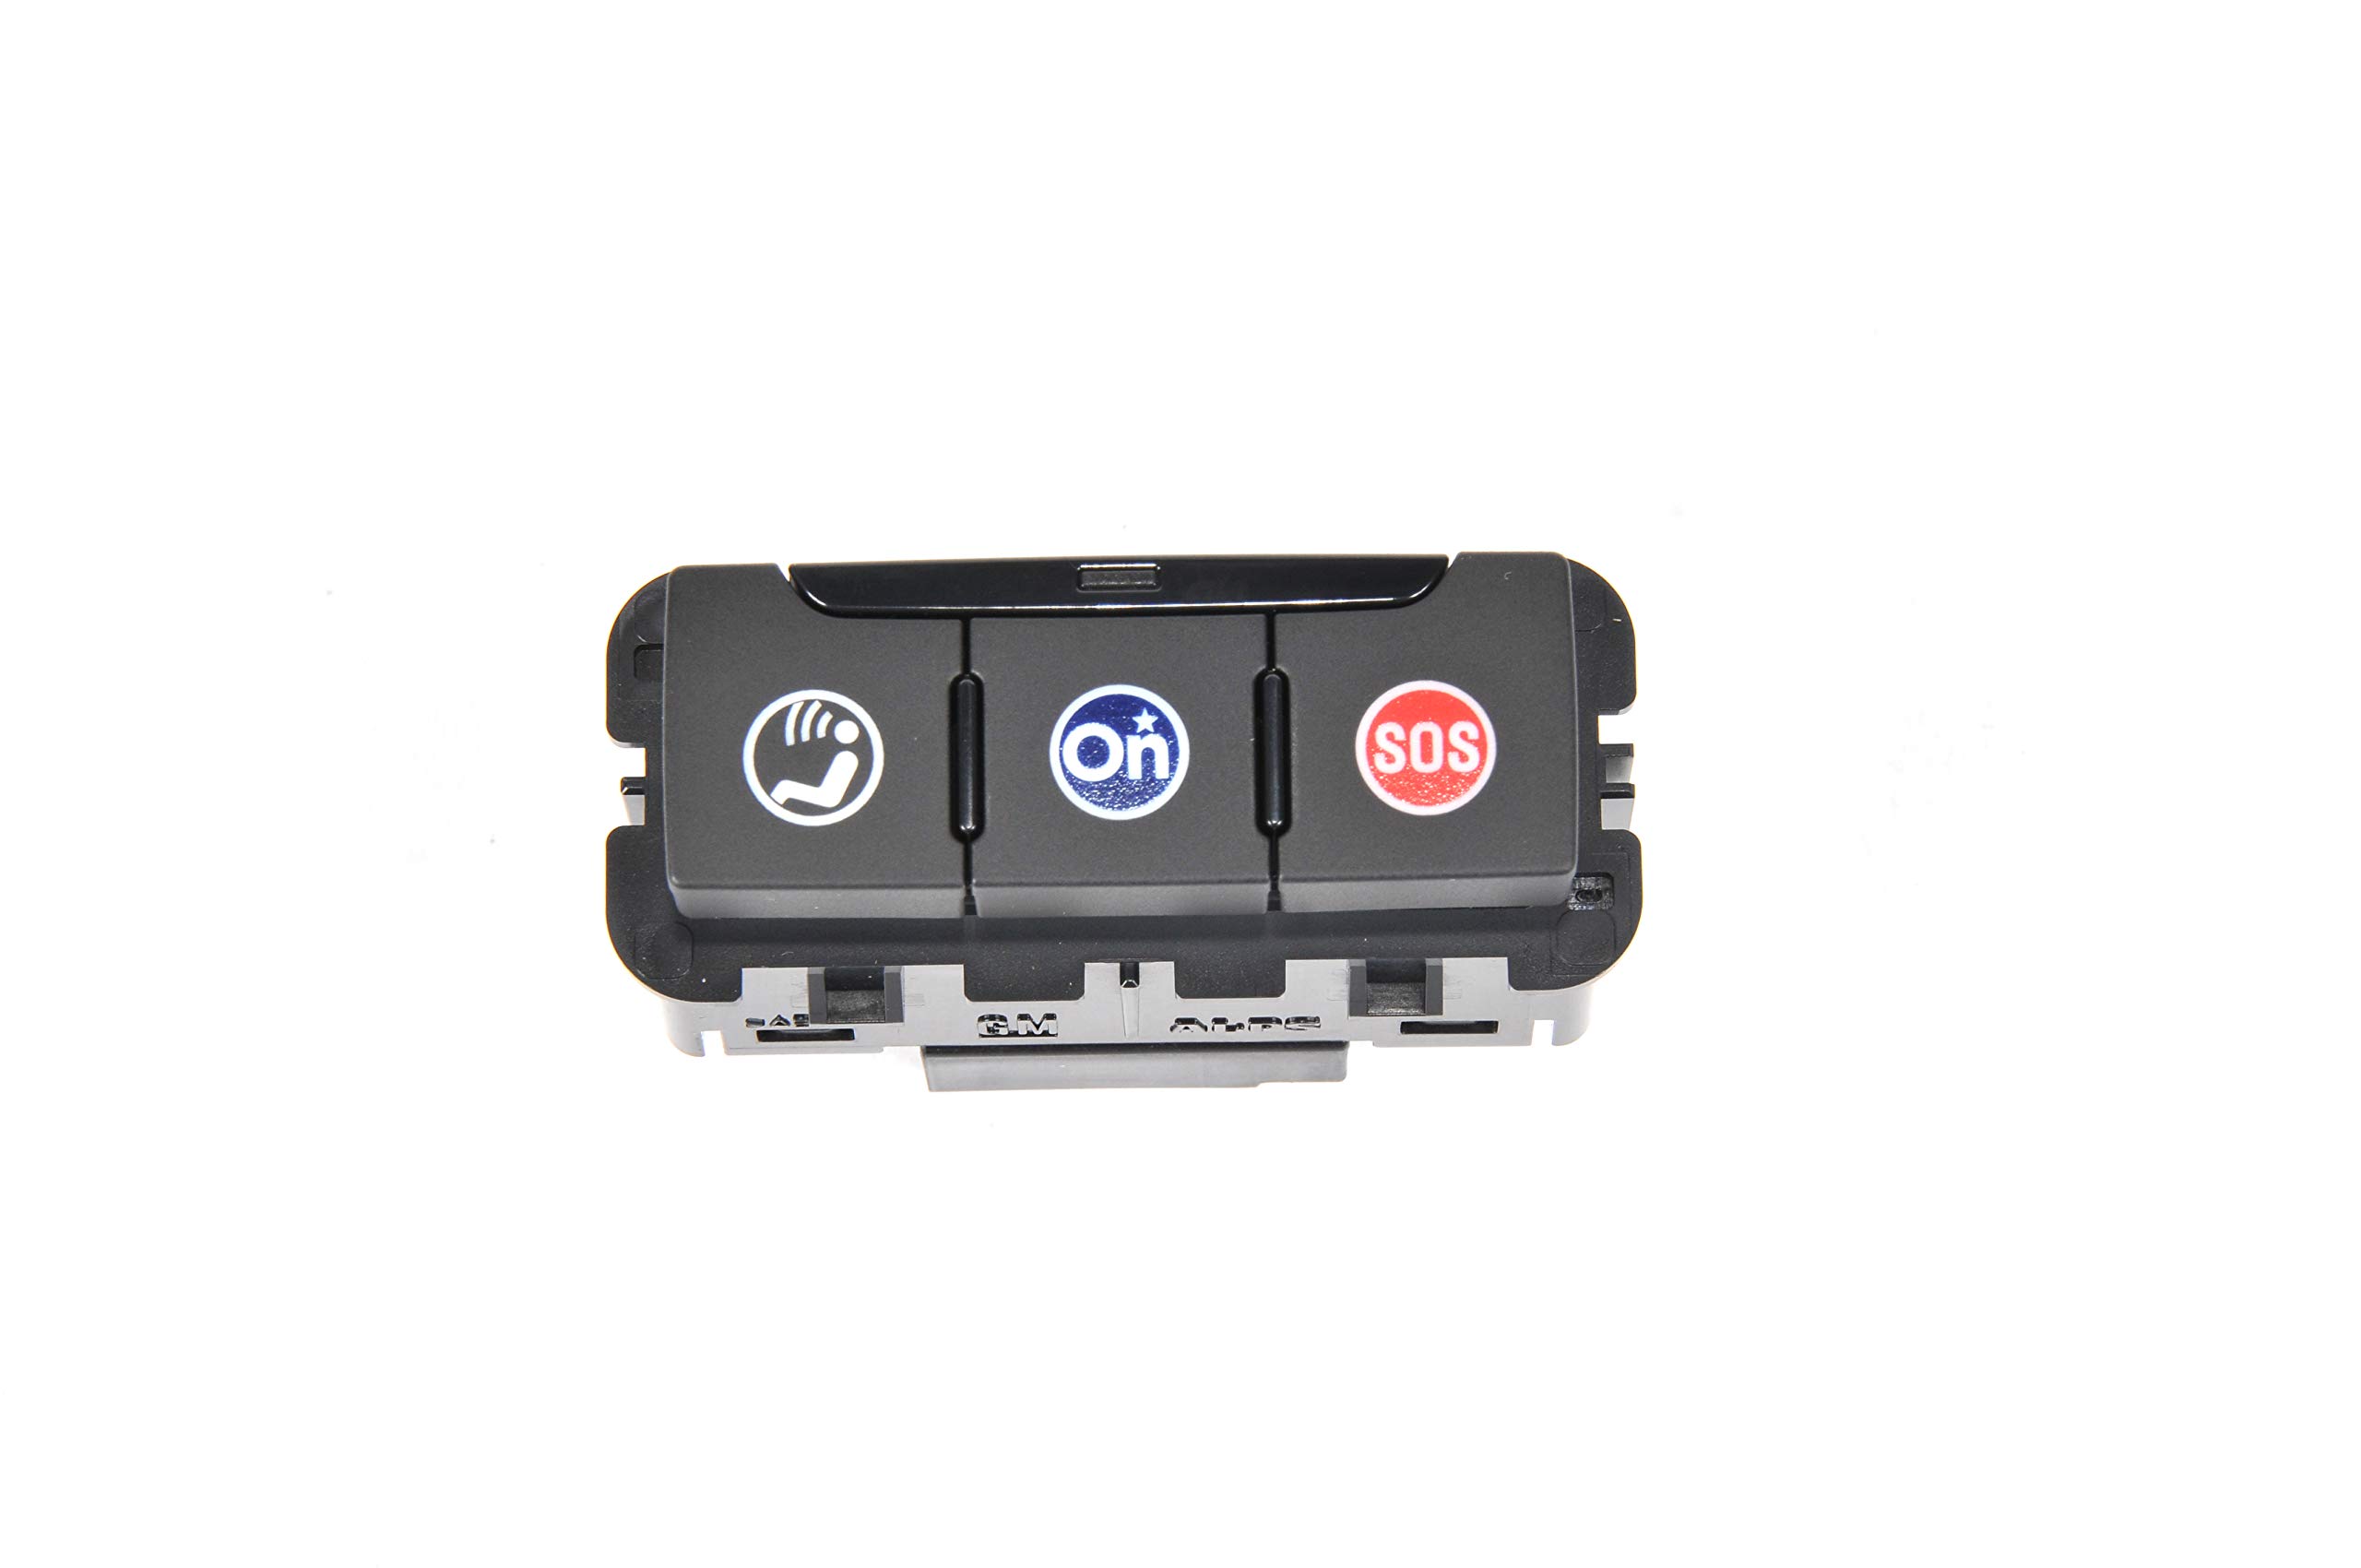 GM Genuine Parts 13440111 Jet Black Button for Hands Free Calling